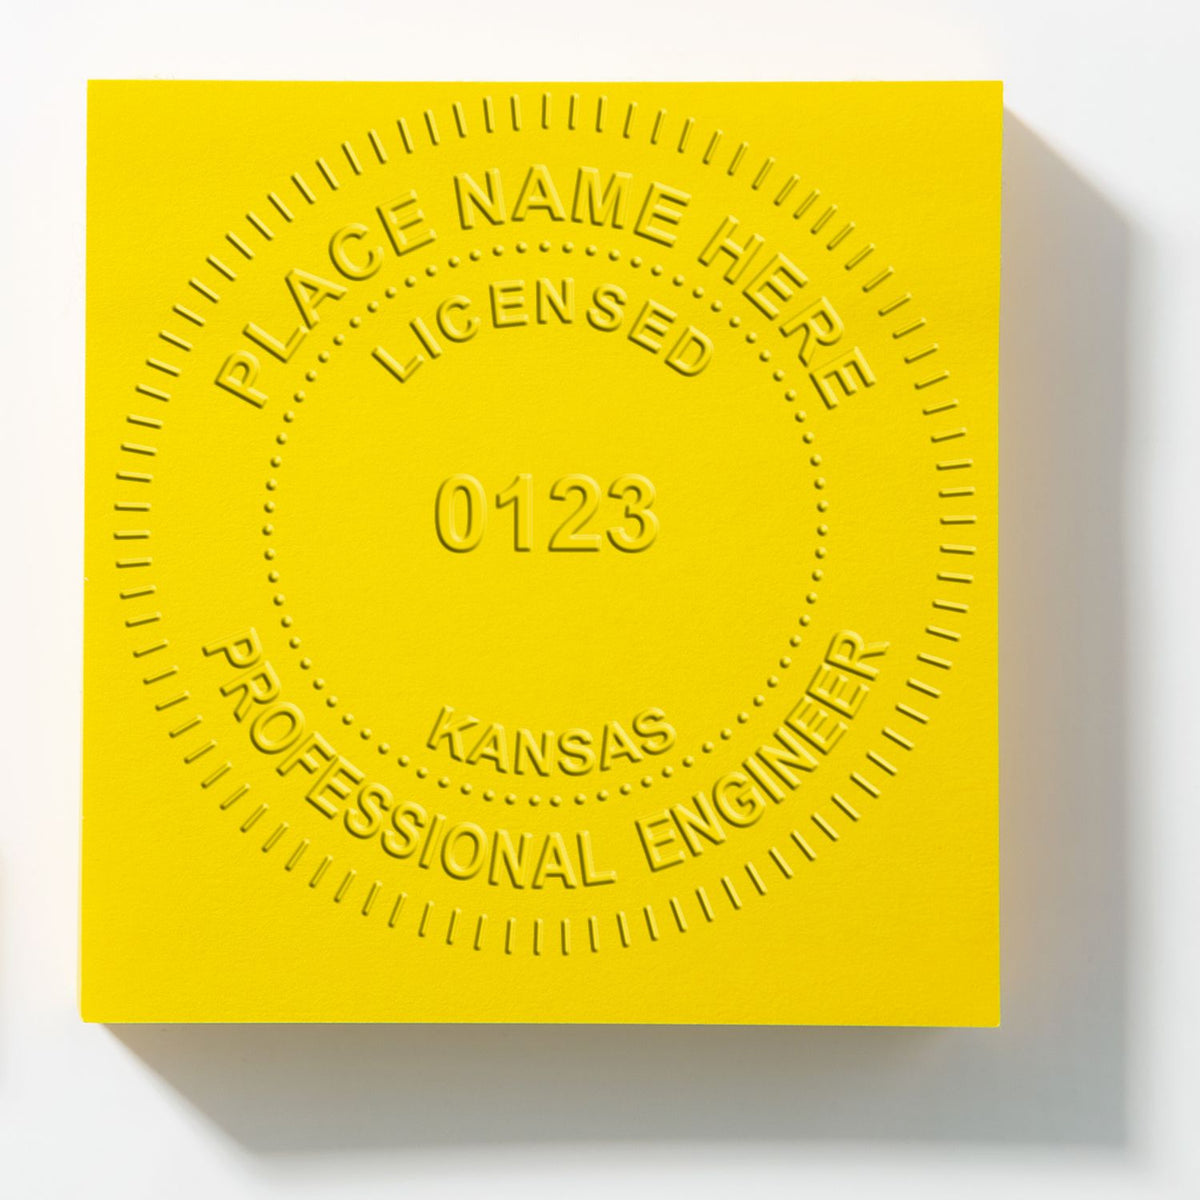 This paper is stamped with a sample imprint of the Kansas Engineer Desk Seal, signifying its quality and reliability.